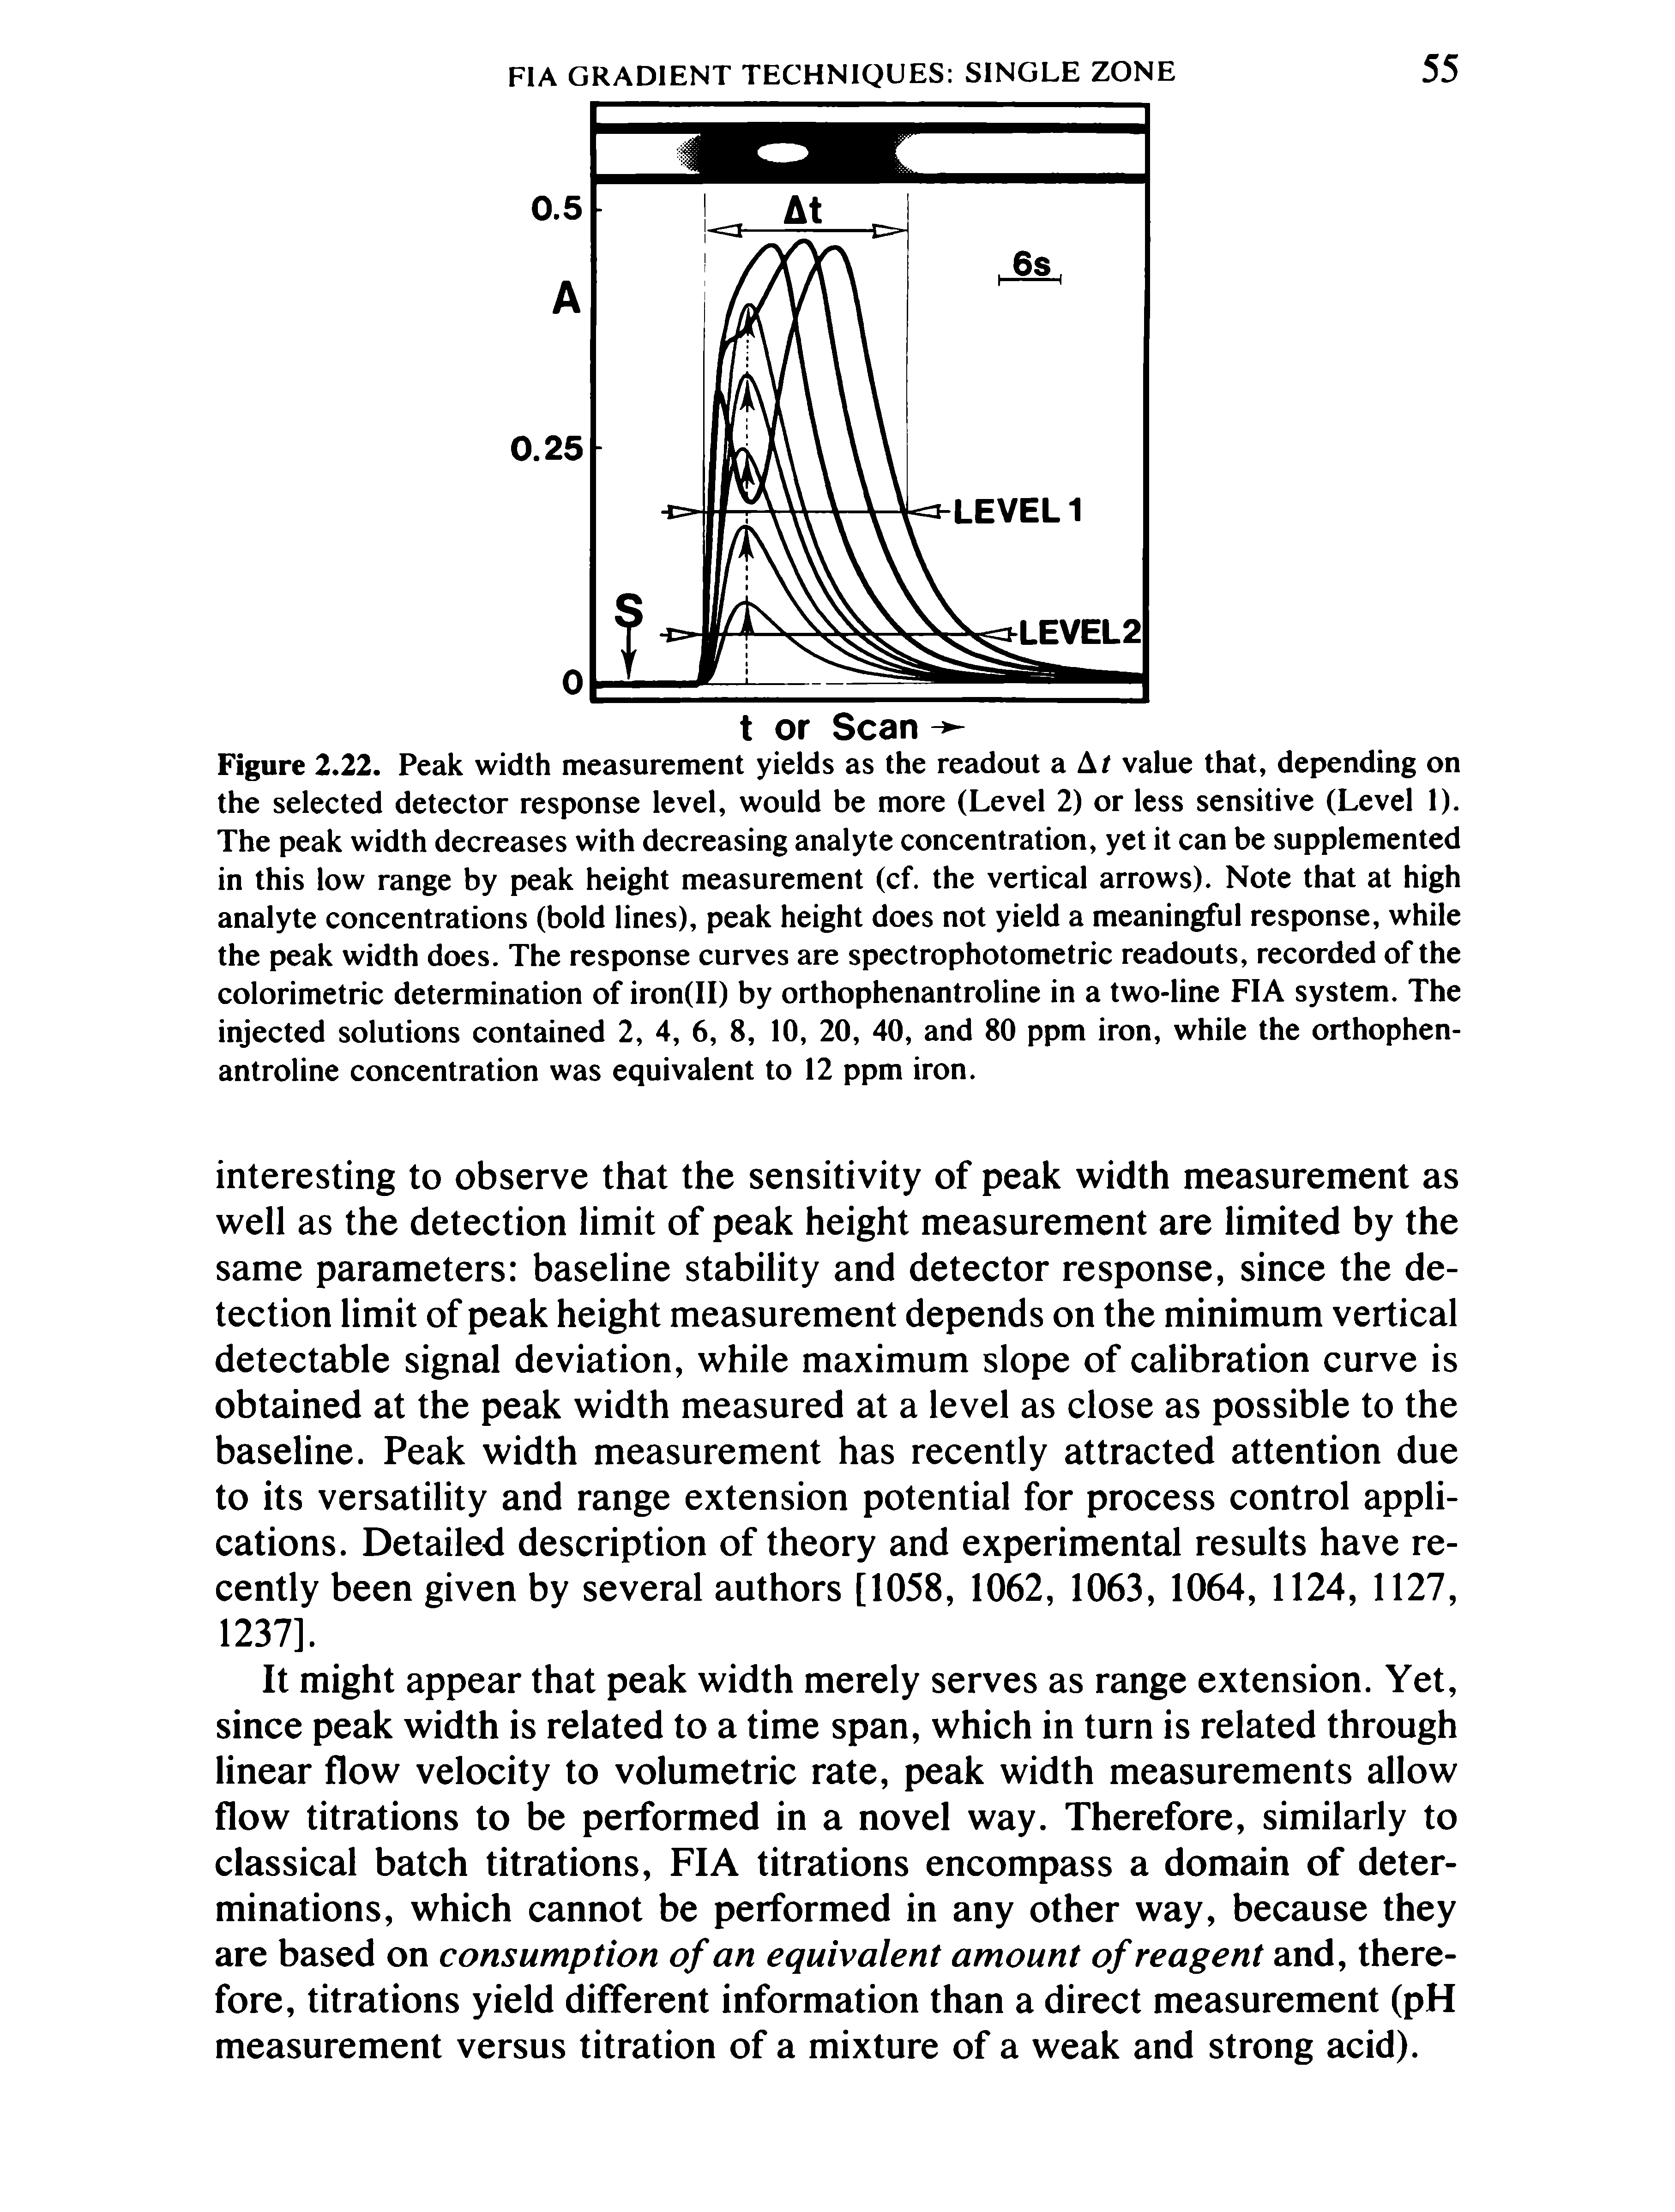 Figure 2.22. Peak width measurement yields as the readout a A/ value that, depending on the selected detector response level, would be more (Level 2) or less sensitive (Level 1). The peak width decreases with decreasing analyte concentration, yet it can be supplemented in this low range by peak height measurement (cf. the vertical arrows). Note that at high analyte concentrations (bold lines), peak height does not yield a meaningful response, while the peak width does. The response curves are spectrophotometric readouts, recorded of the colorimetric determination of iron(II) by orthophenantroline in a two-line FIA system. The injected solutions contained 2, 4, 6, 8, 10, 20, 40, and 80 ppm iron, while the orthophenantroline concentration was equivalent to 12 ppm iron.